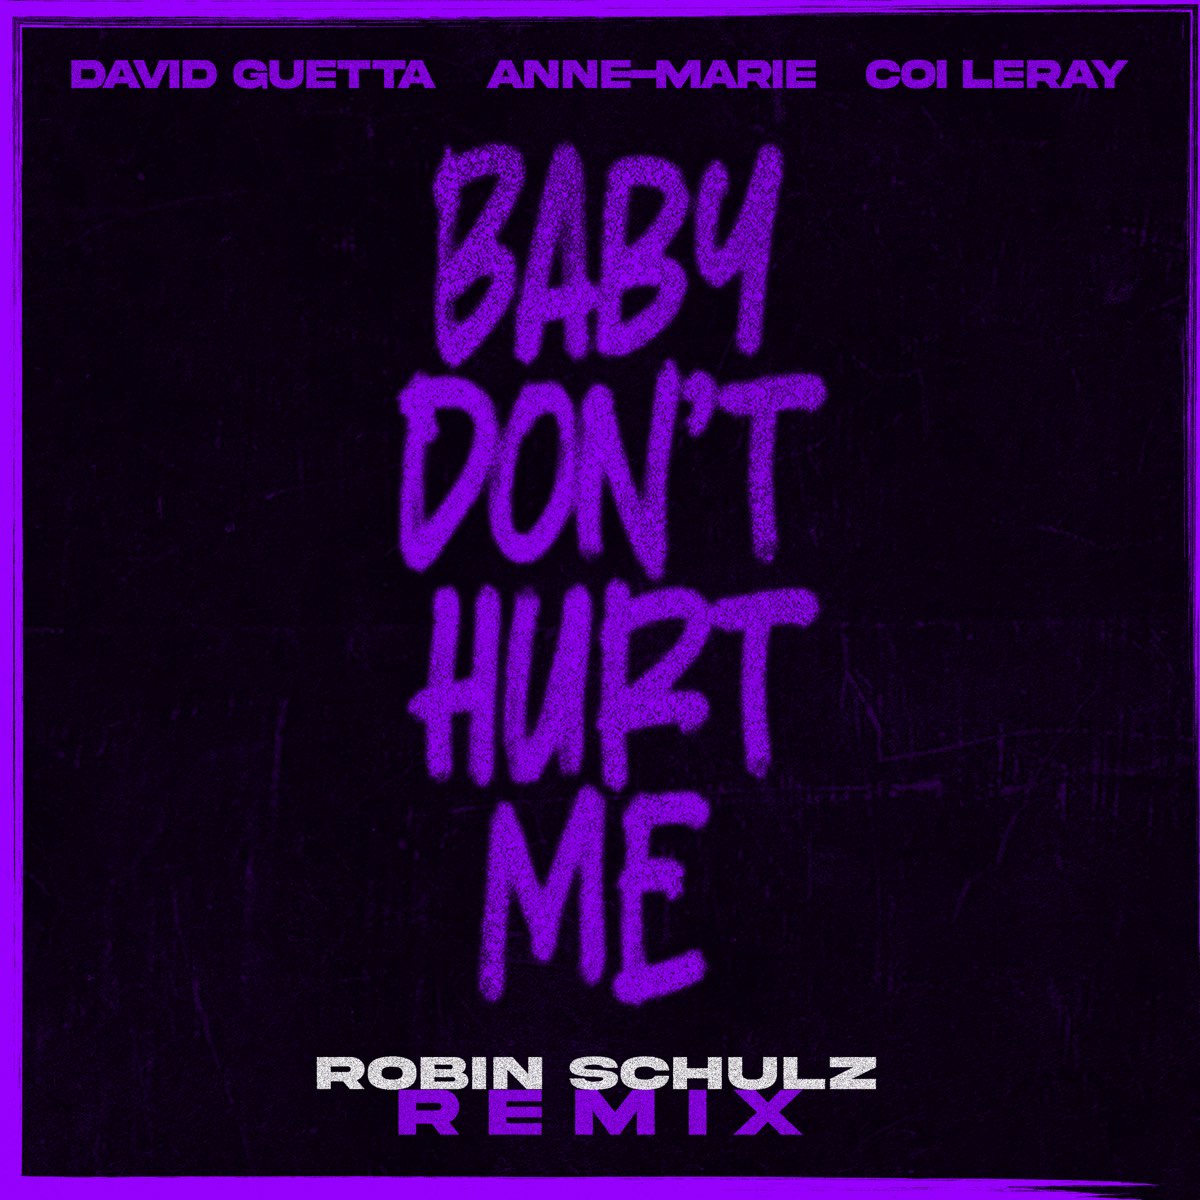 David guetta anne marie don t. Baby don't hurt me David Guetta. David Guetta, Anne-Marie, coi Leray - Baby don’t hurt me. David Guetta/Sofi Tukker/Anne-Marie/coi Leray - Baby don't hurt me (Sofi Tukker Remix). Baby font hurt me фото.